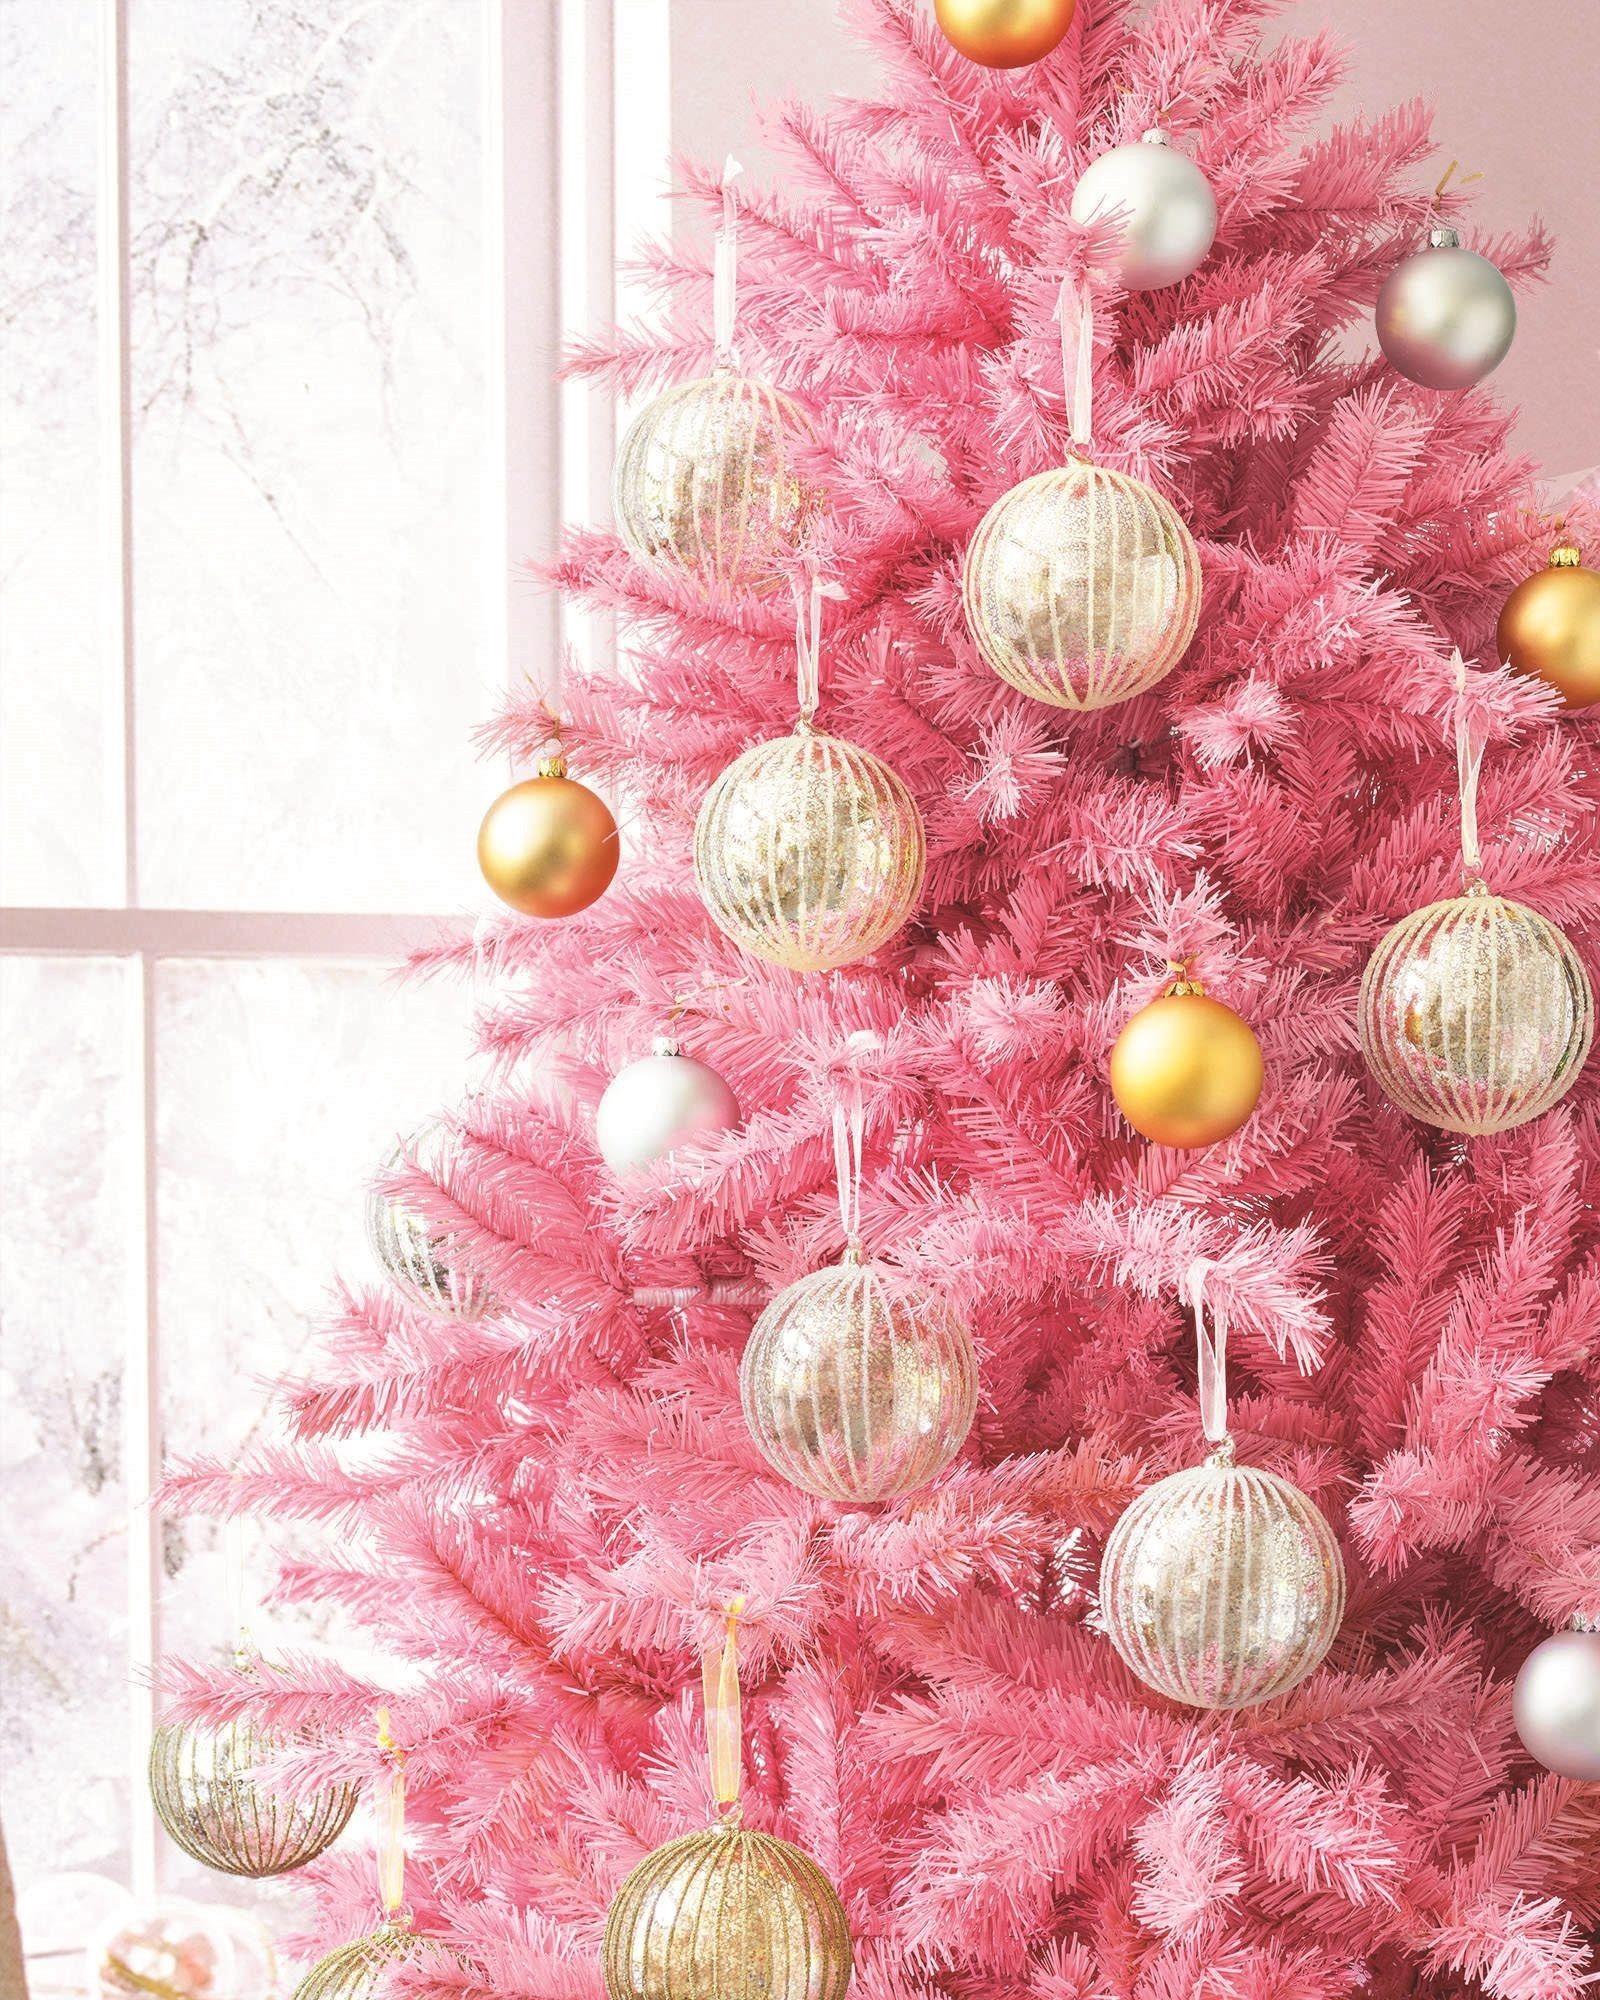 50+ Pink background Christmas tree images for your phone and desktop